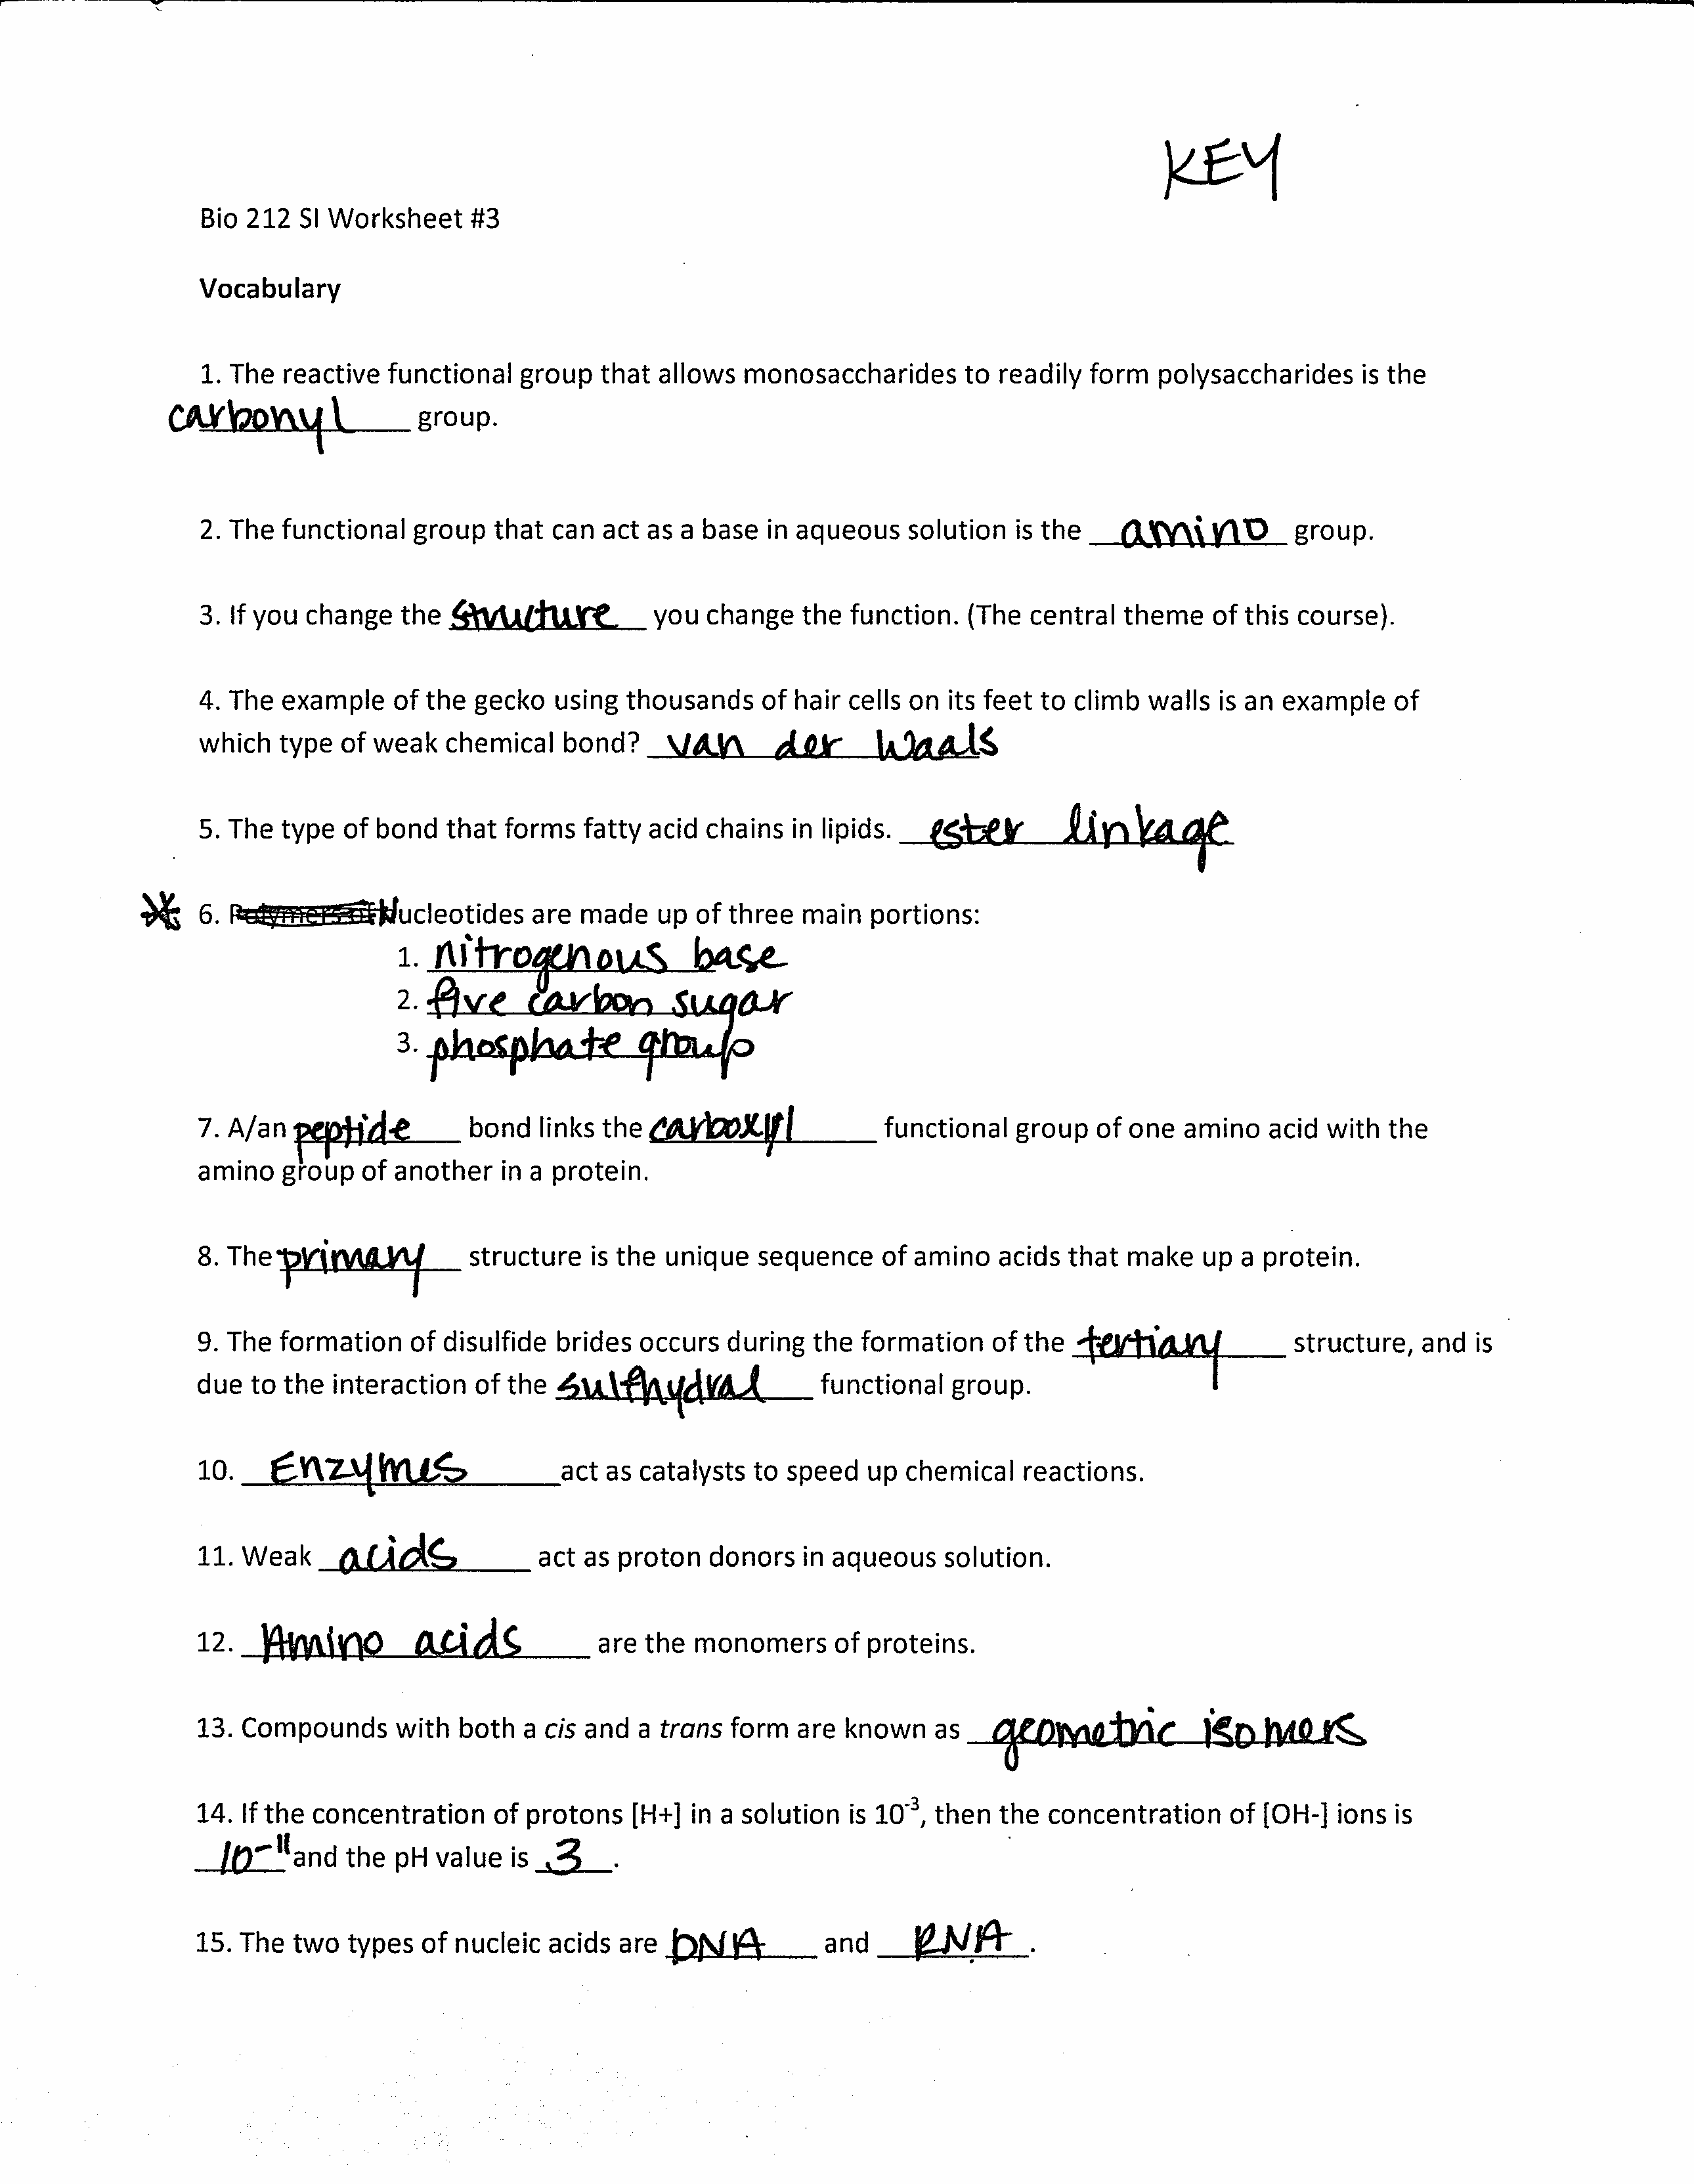 13-best-images-of-12-2-the-structure-of-dna-worksheet-answers-dna-structure-worksheet-answers